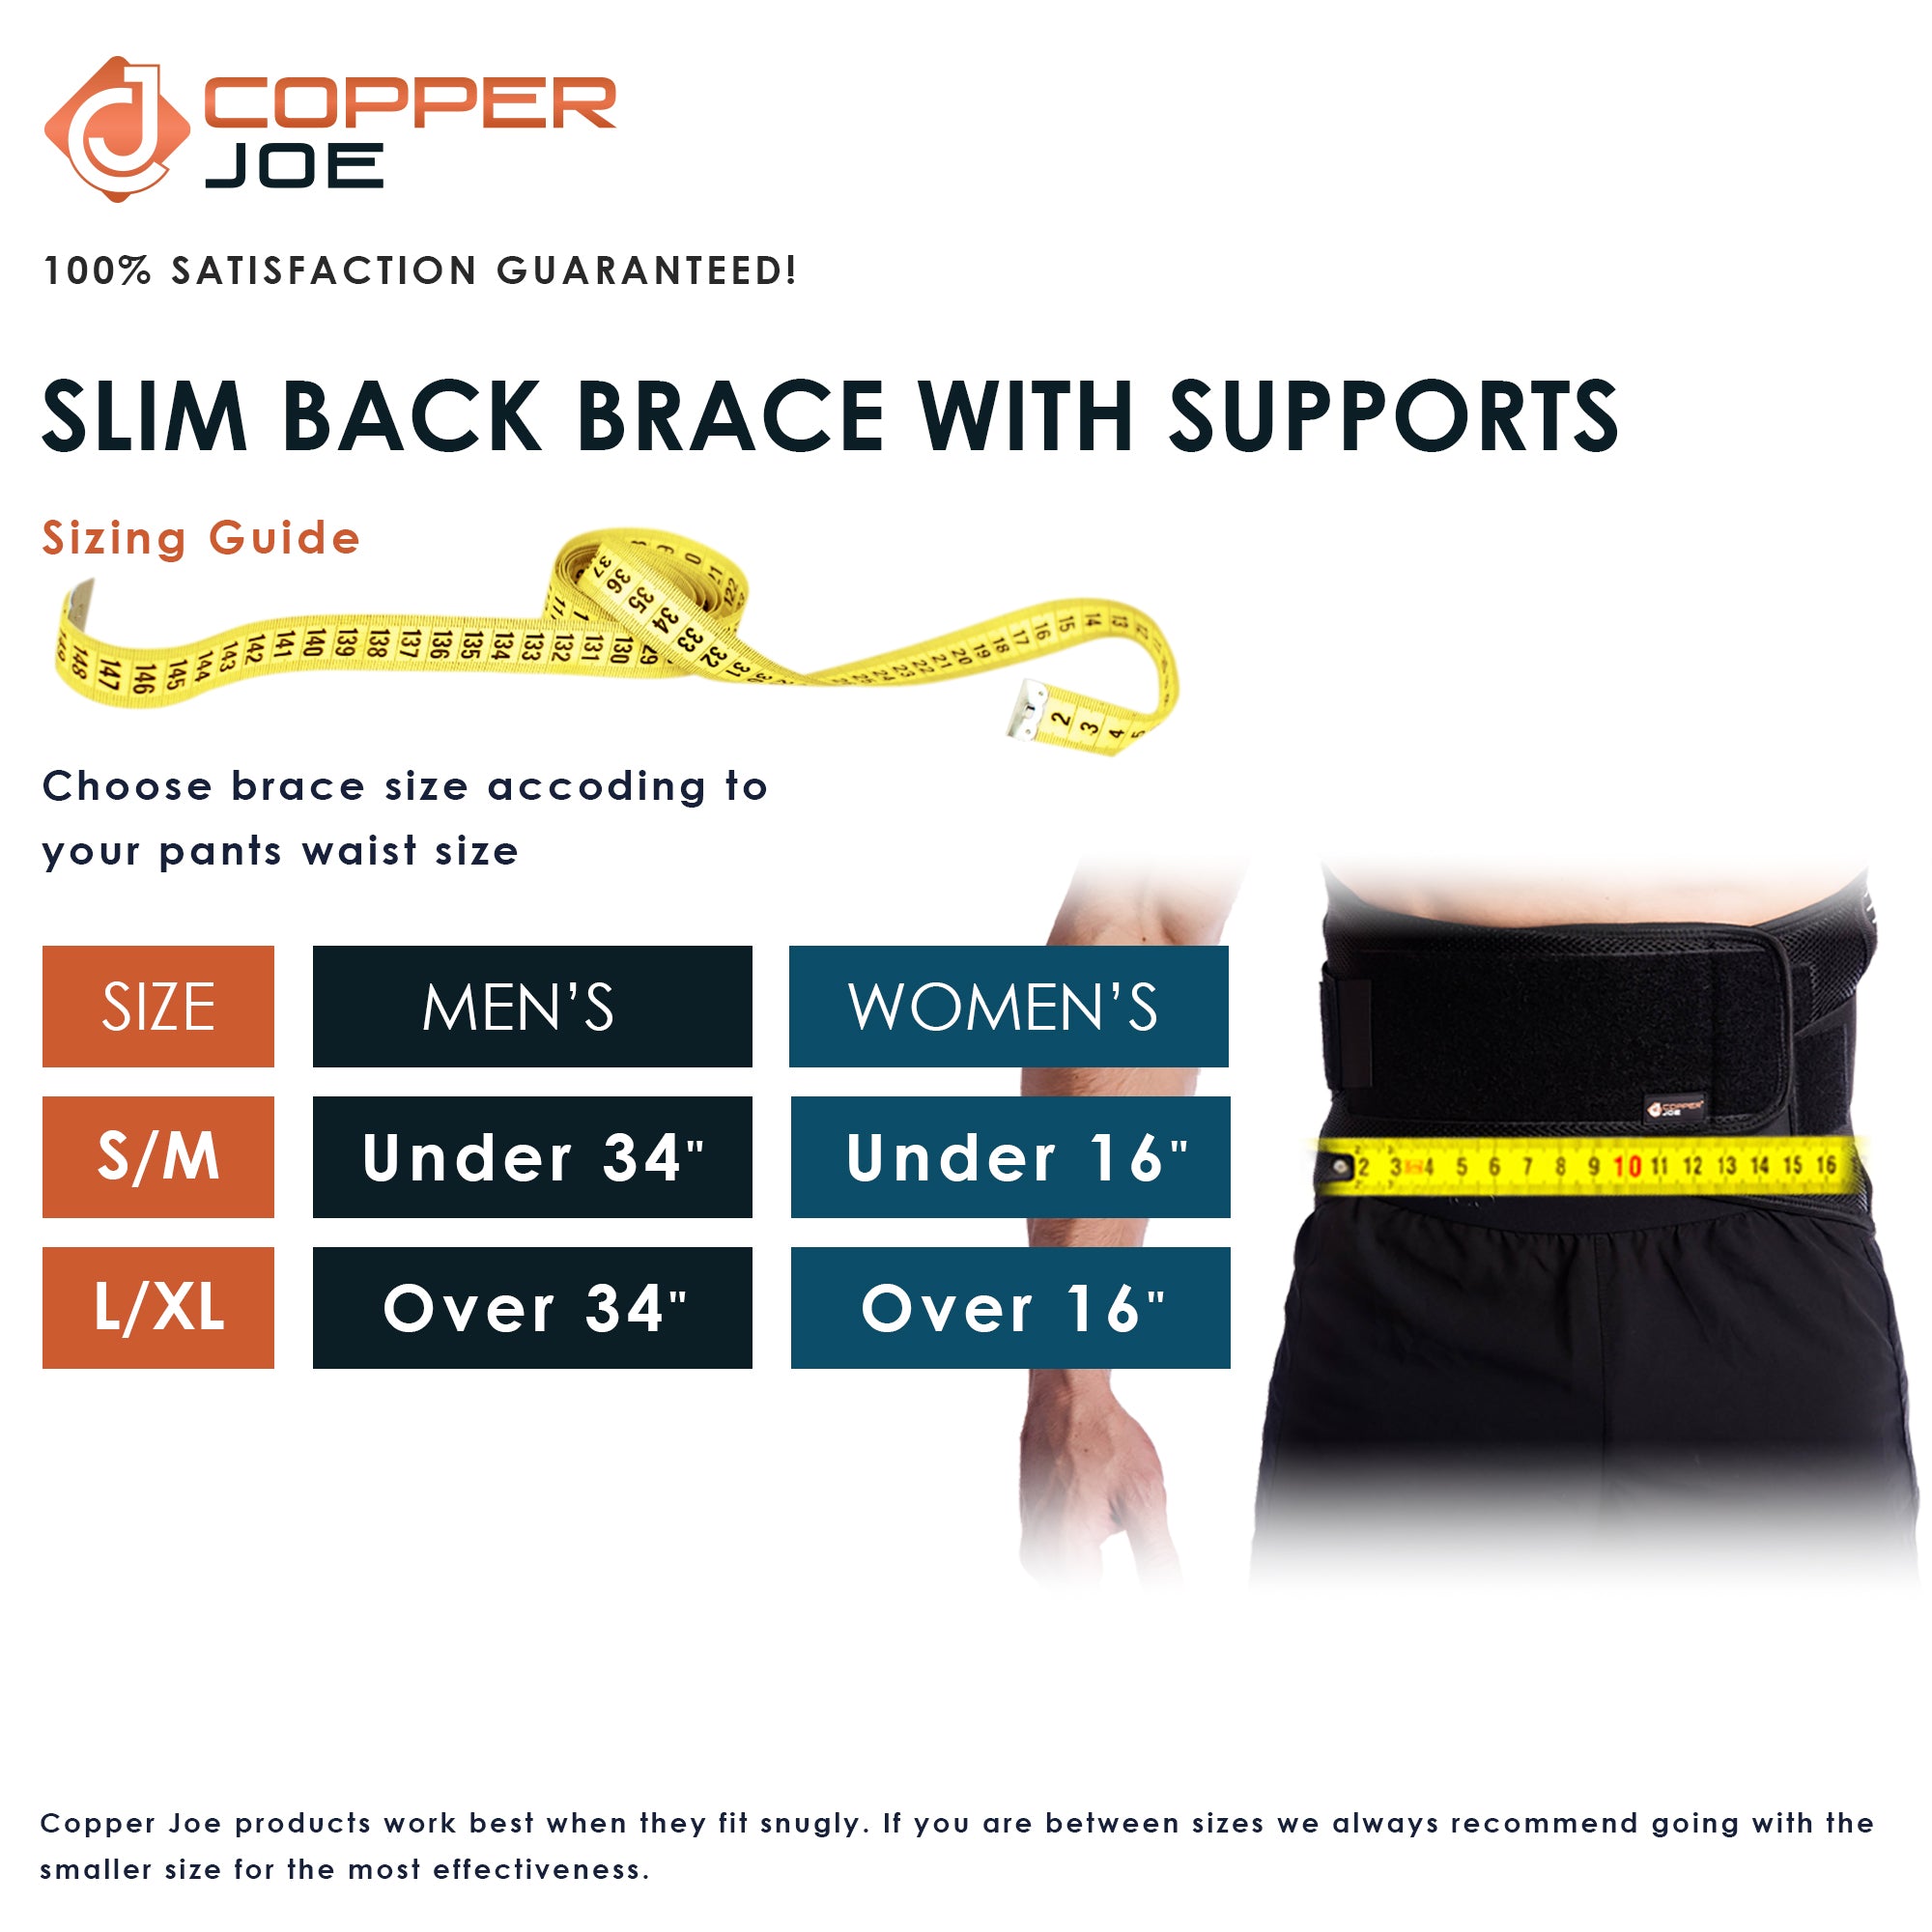 Copper Joe Ultimate Copper Infused Back Brace - Relief from Back Pain, Herniated Disc, Sciatica, Scoliosis and more! Breathable Waist Lumbar Lower Back Brace w Slim Design and Extra Support Bars. For Men and Women